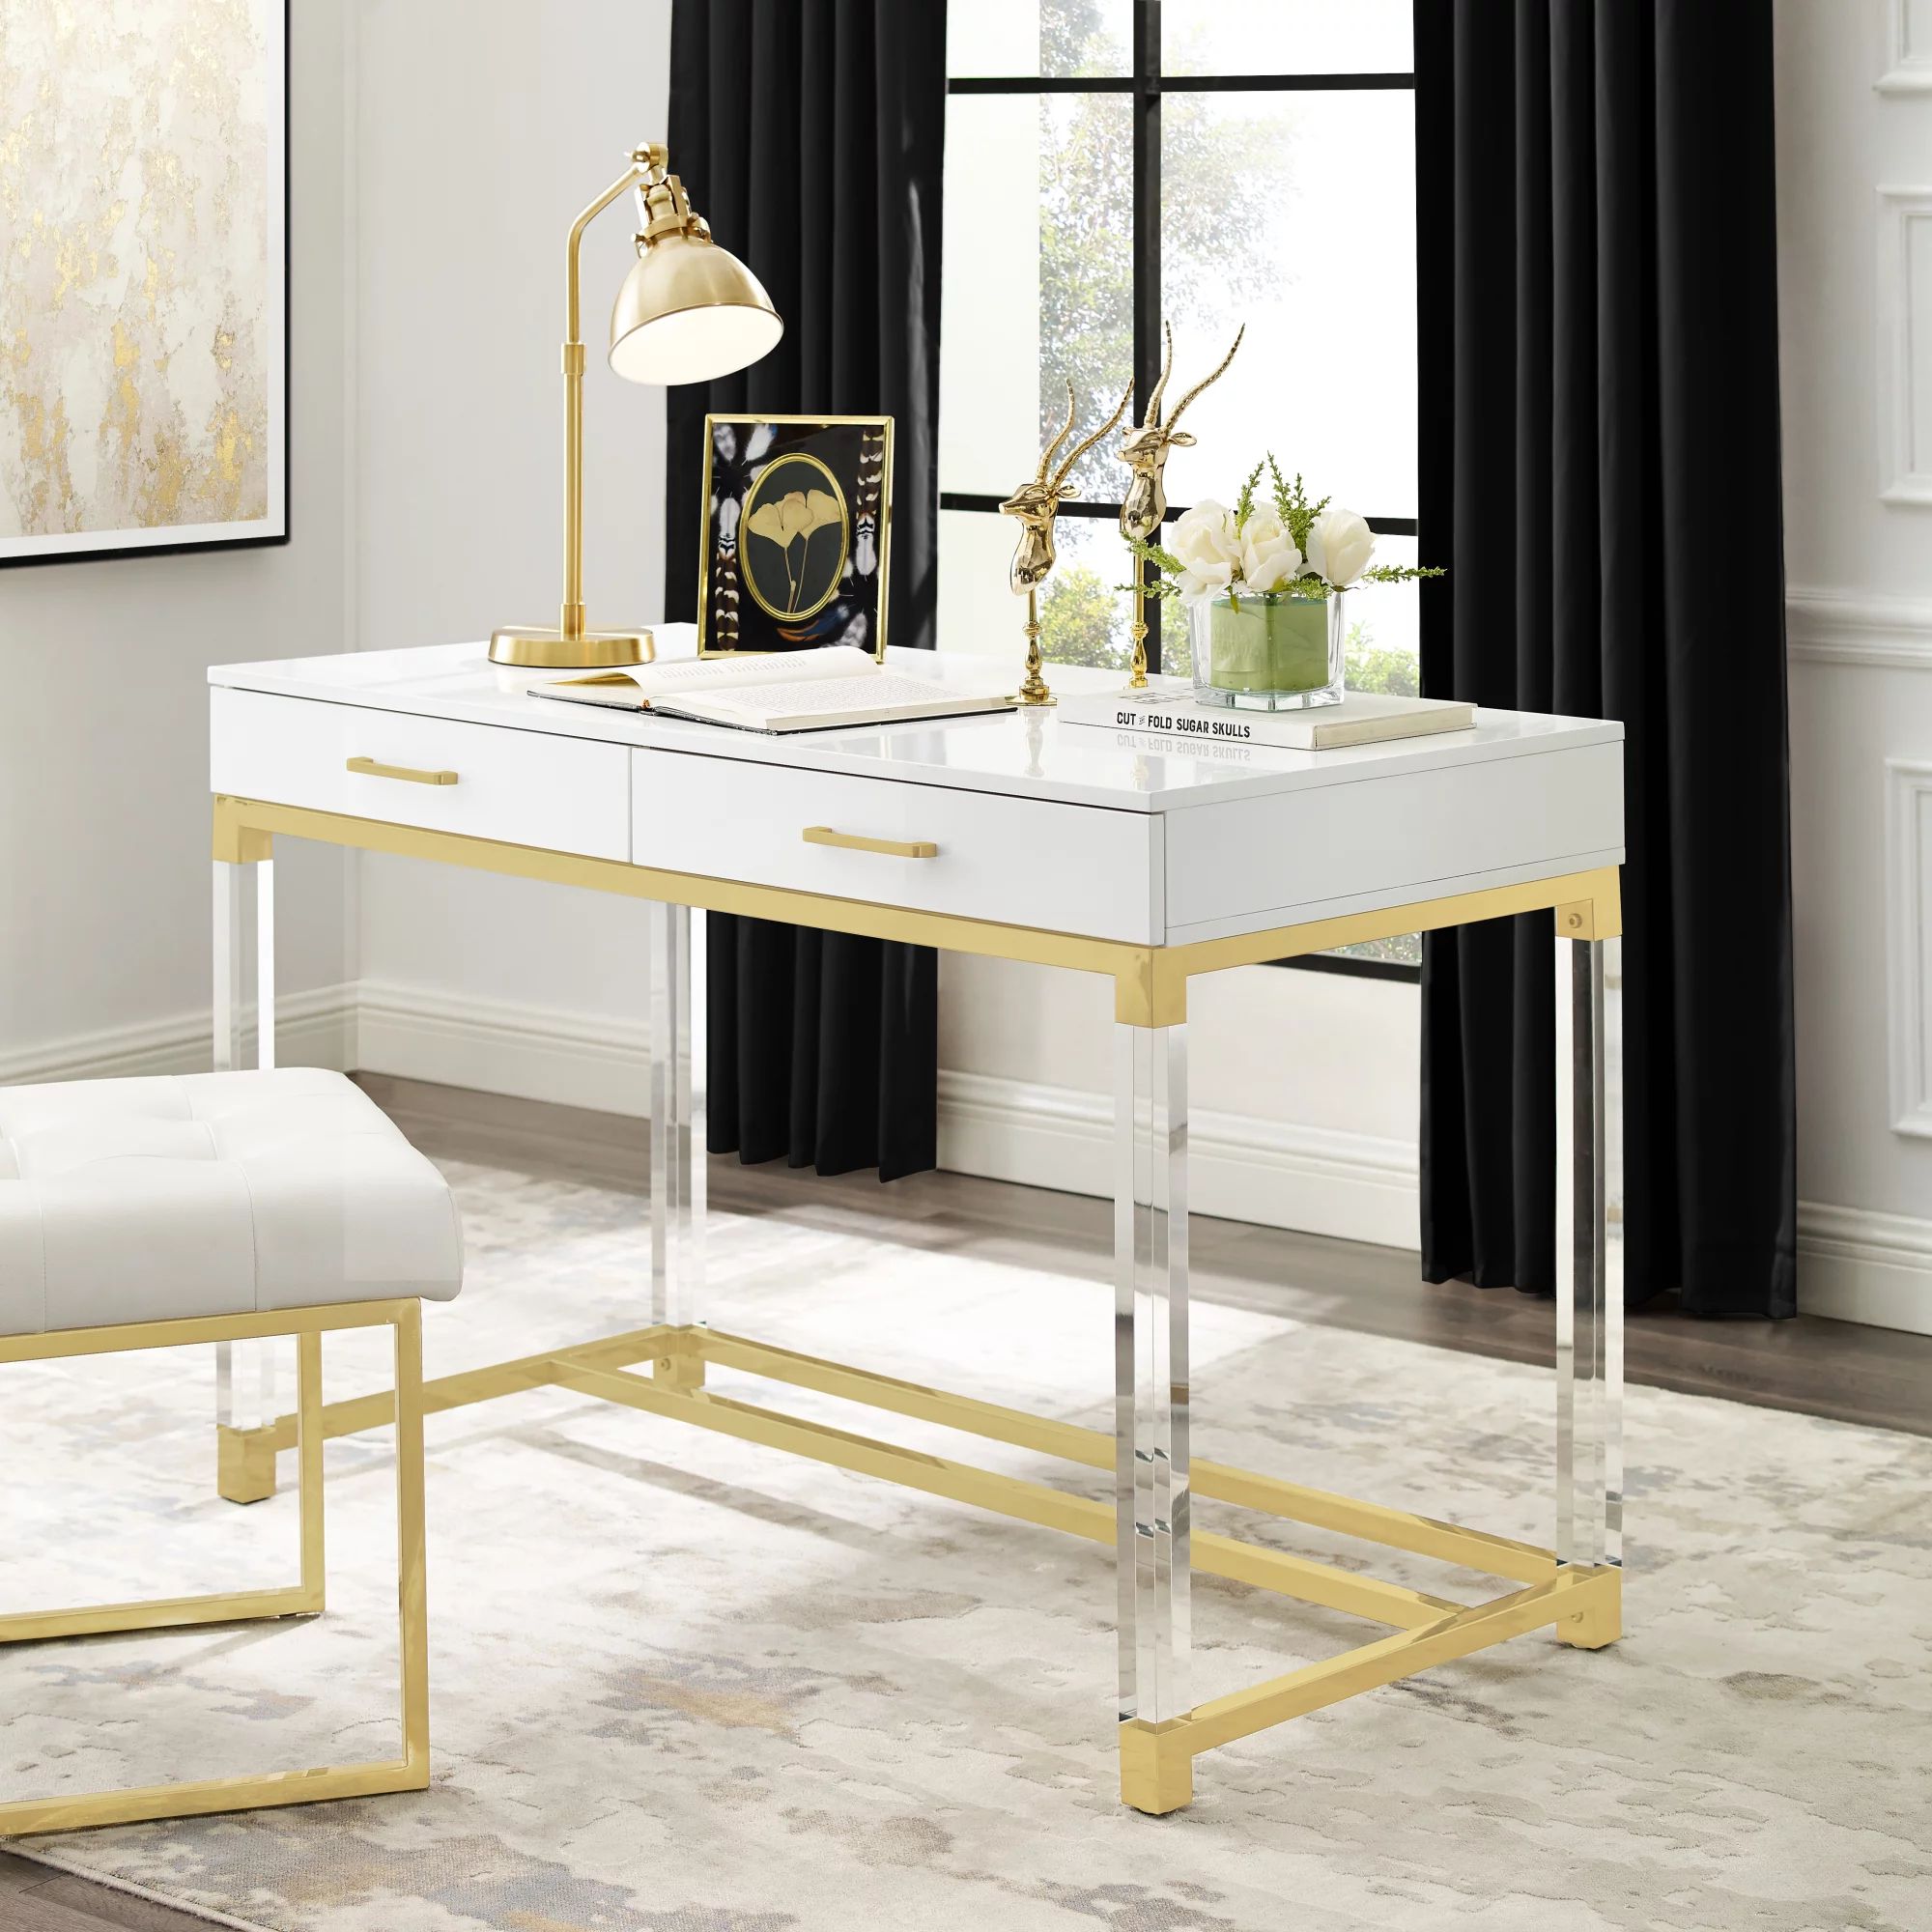 Alena White Writing Desk - 2 Drawers | High Gloss | Acrylic Legs | Gold Stainless Steel Base | Mo... | Walmart (US)